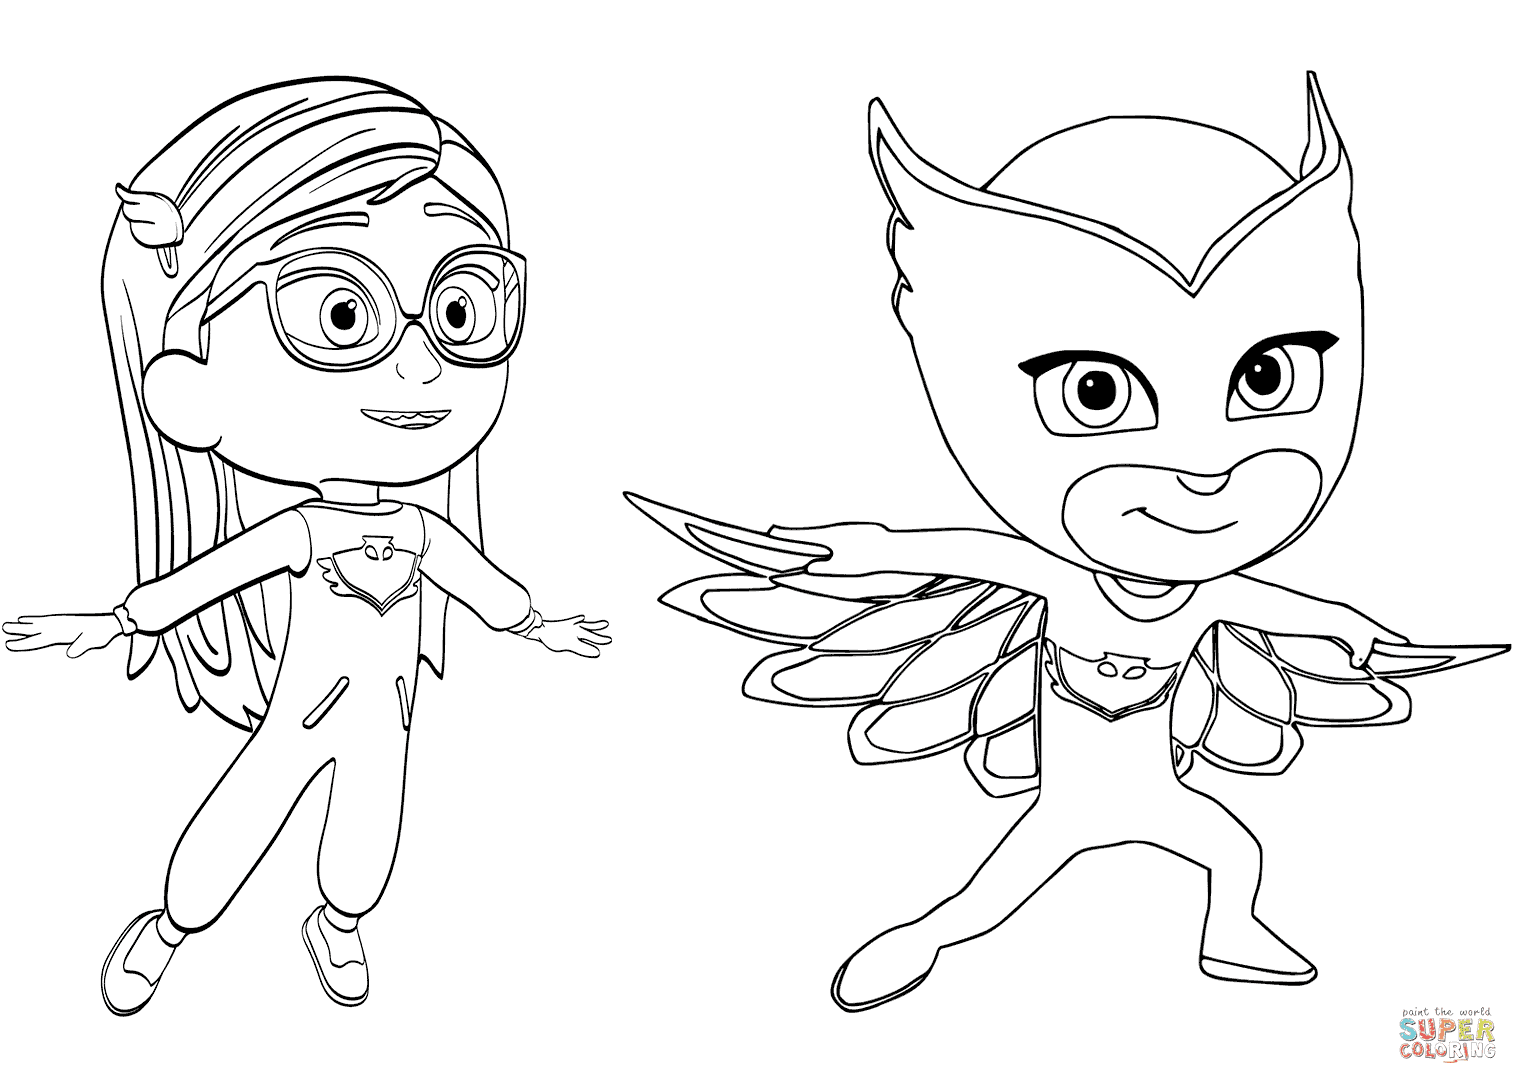 Unique Pj Masks Free Coloring Pages | Top Free Coloring Pages For Kids